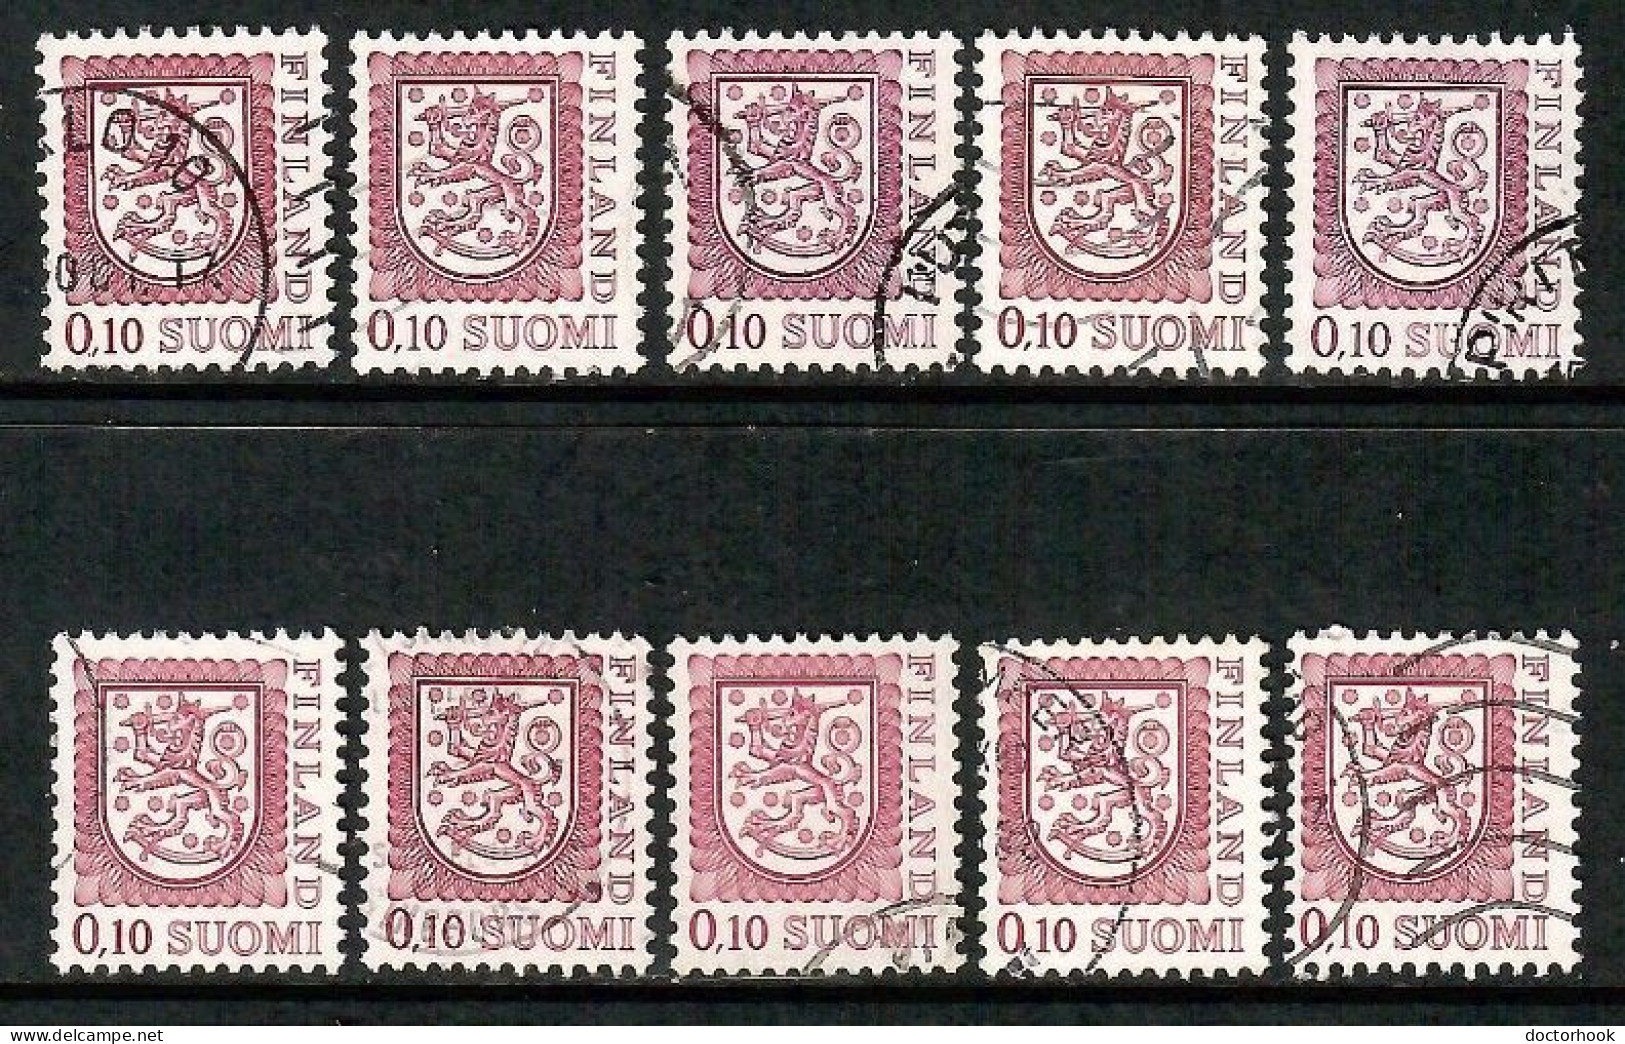 FINLAND   Scott # 555 USED WHOLESALE LOT OF 10 (CONDITION AS PER SCAN) (WH-632) - Sammlungen